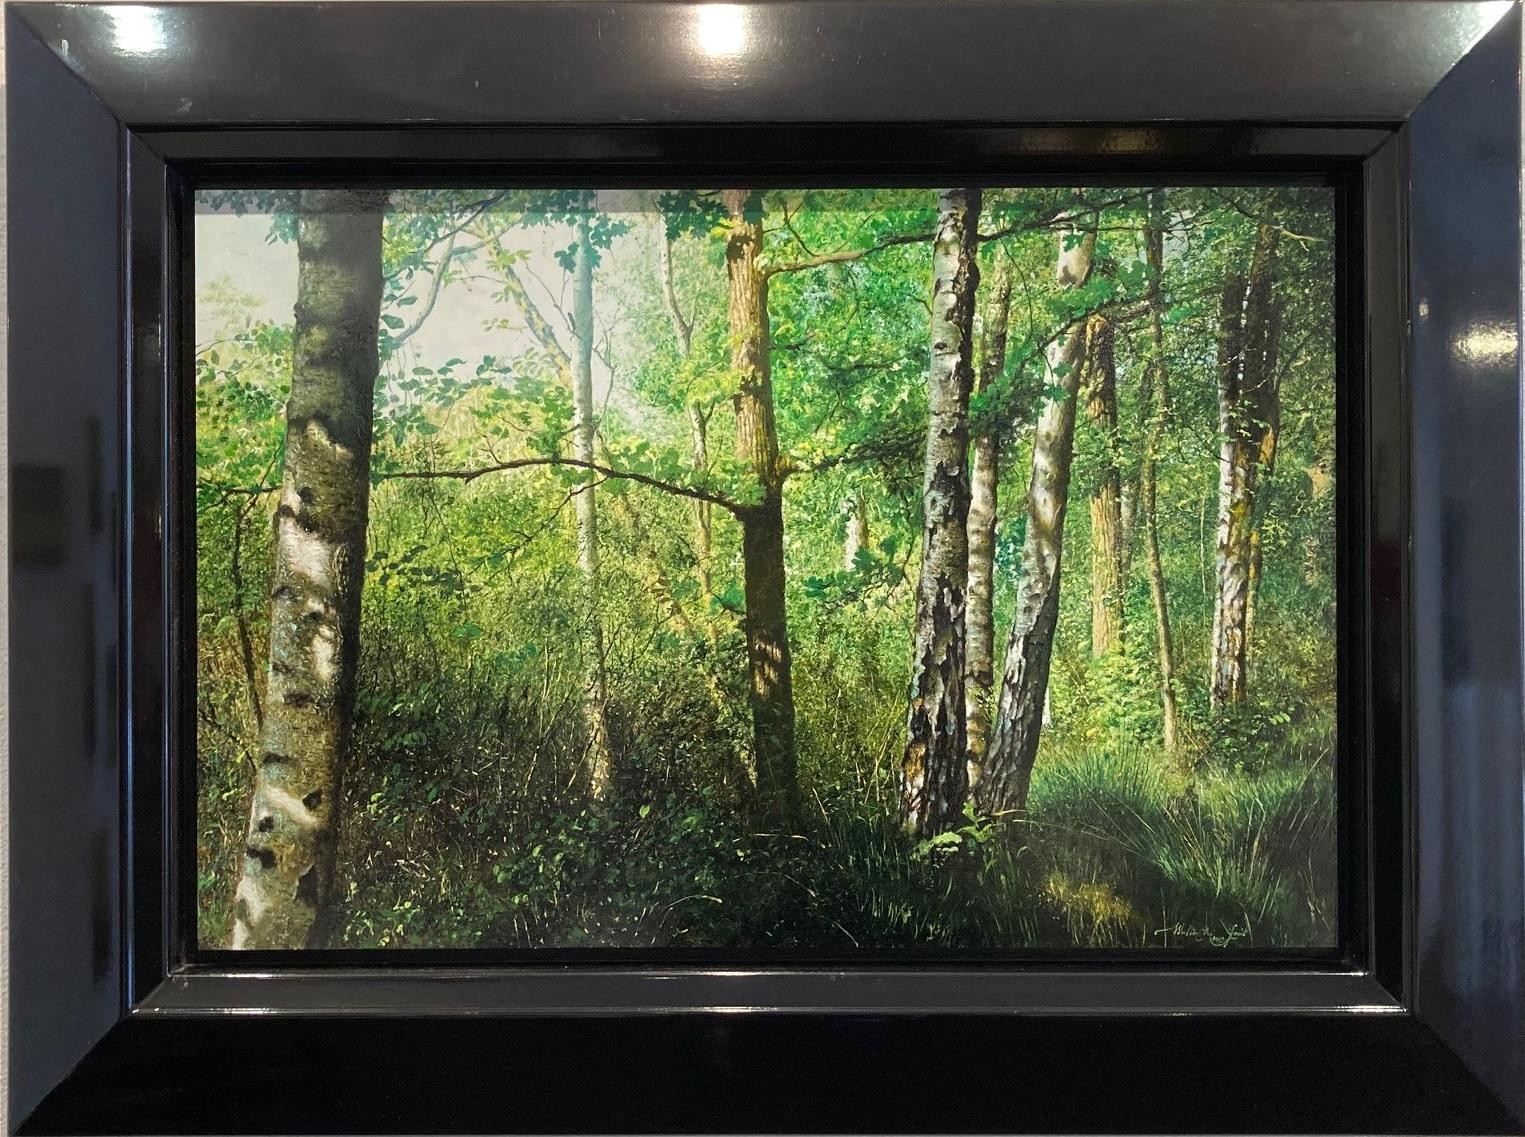 Walter Elst Figurative Painting - Berkenbos Birch Forest in Spring Mood Oil Painting on Panel Wood In Stock